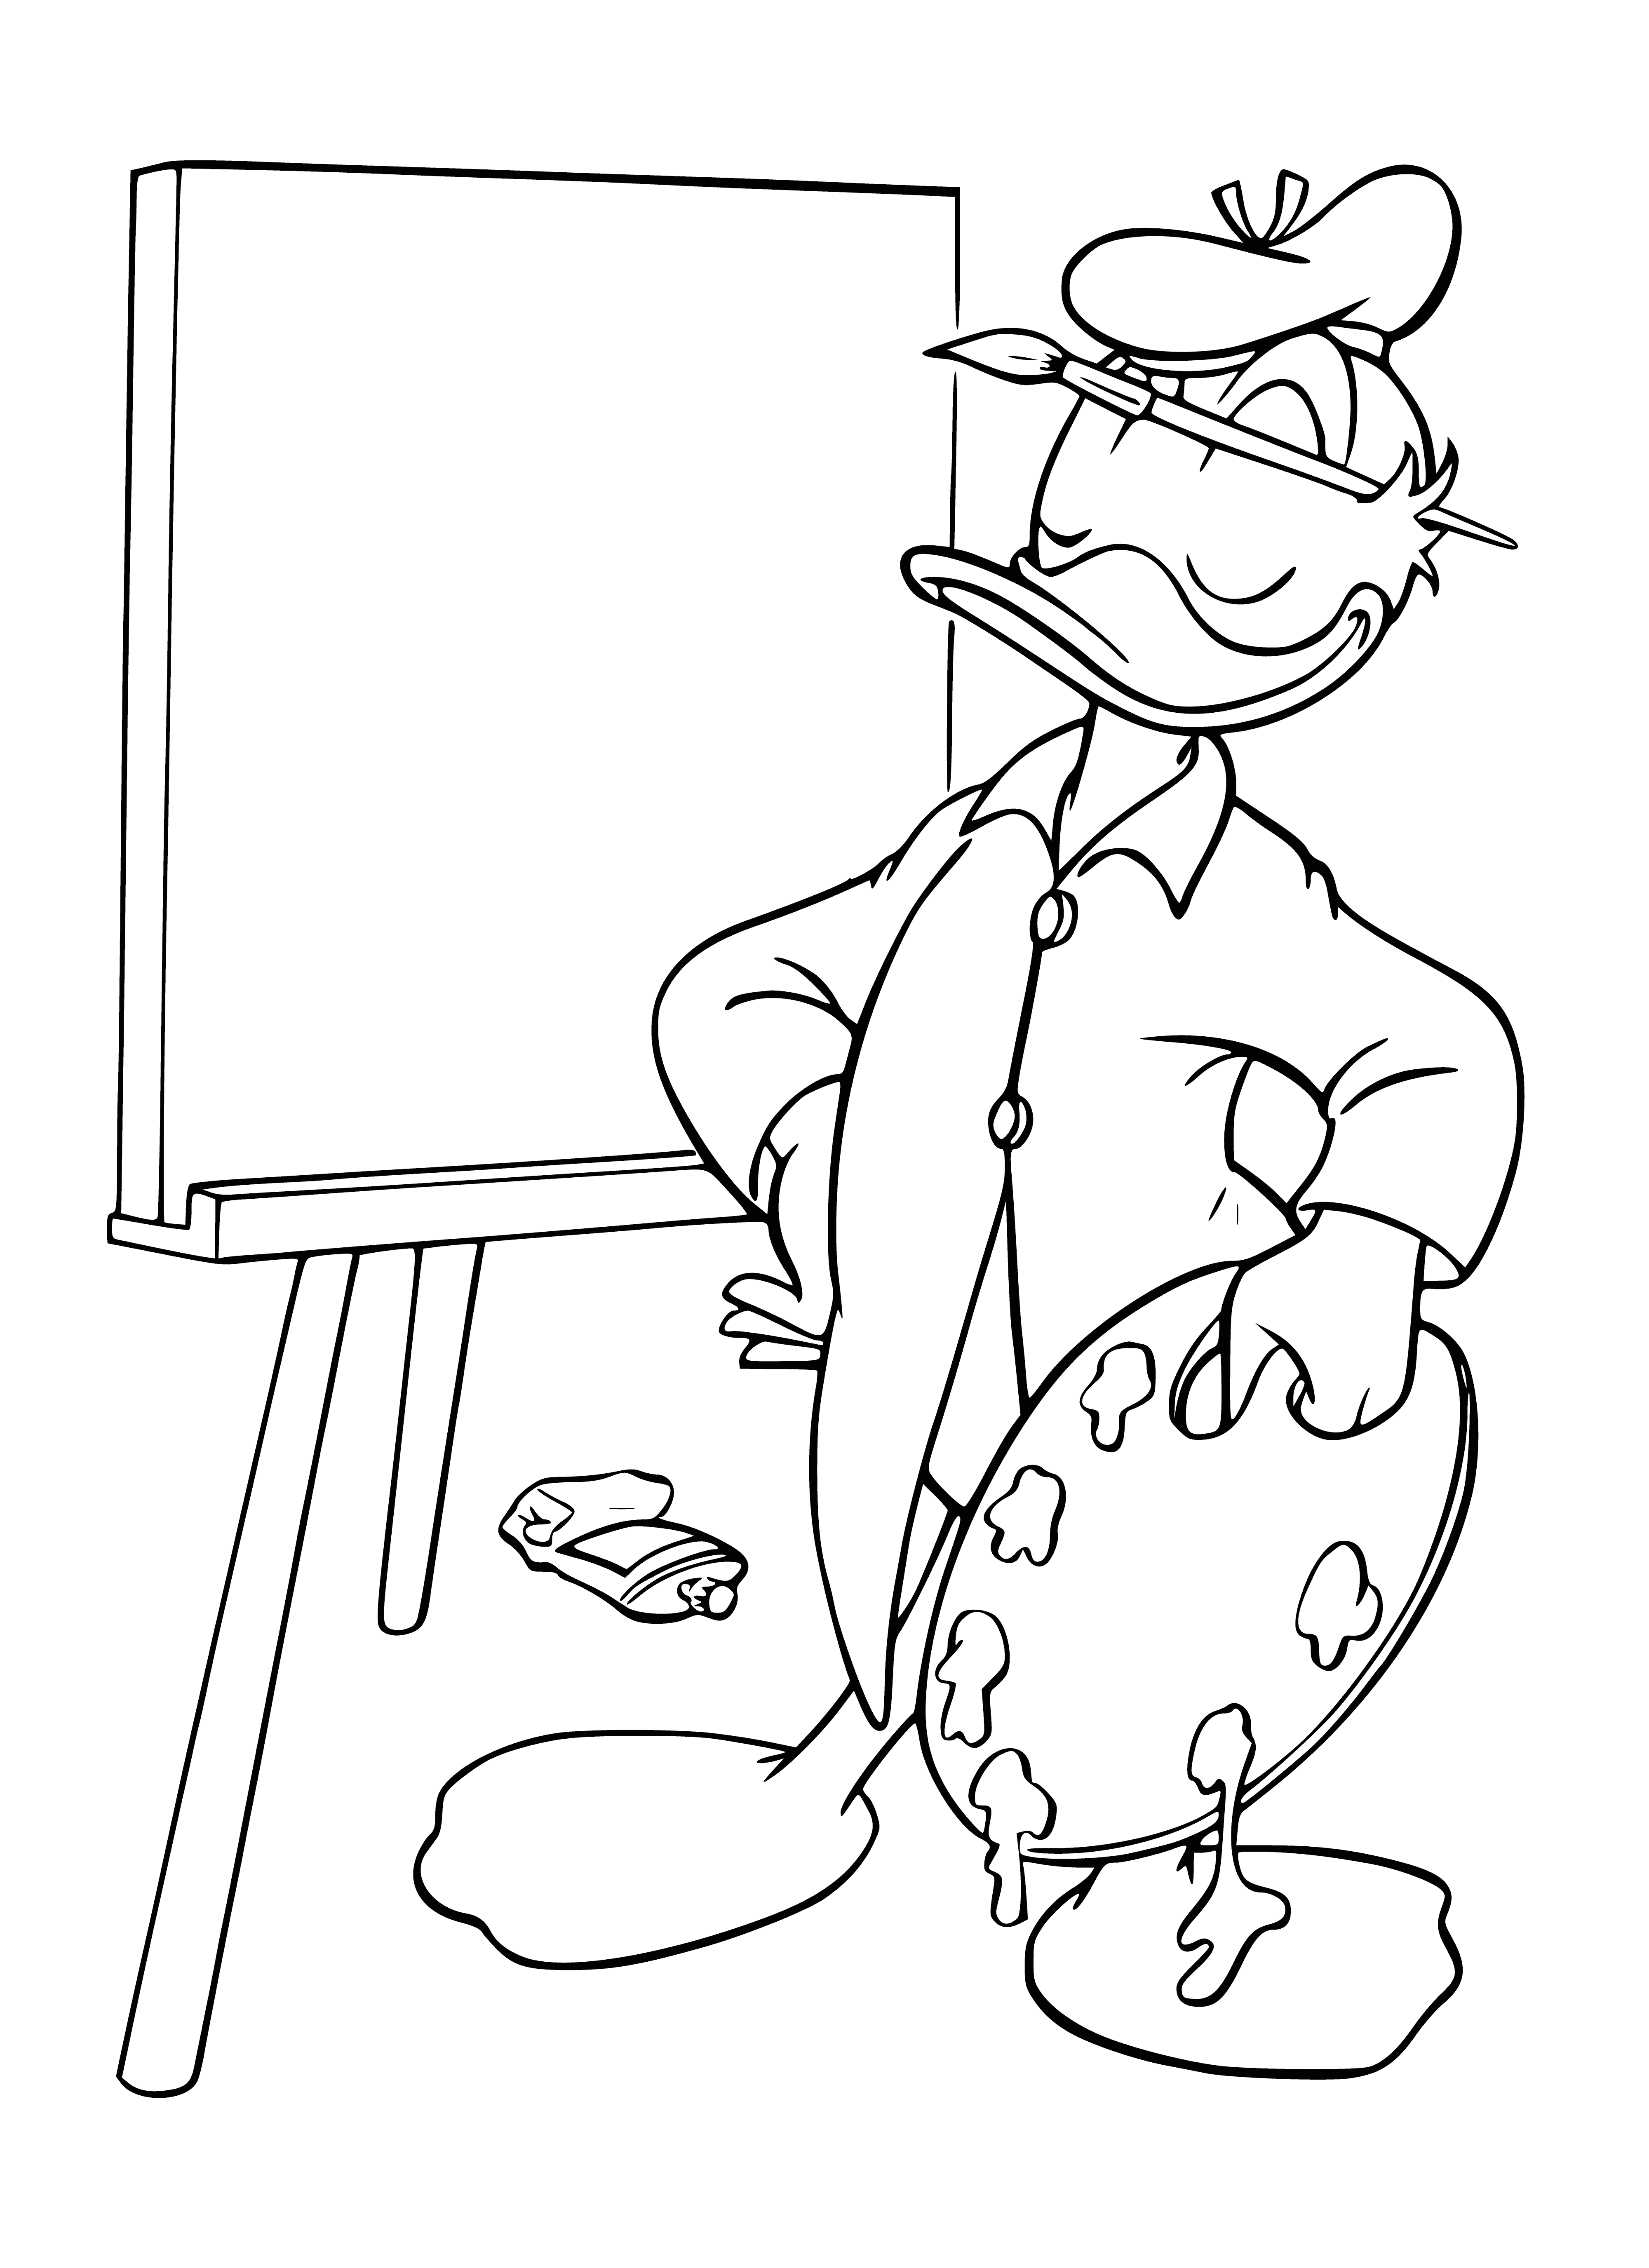 Clear sheet coloring page